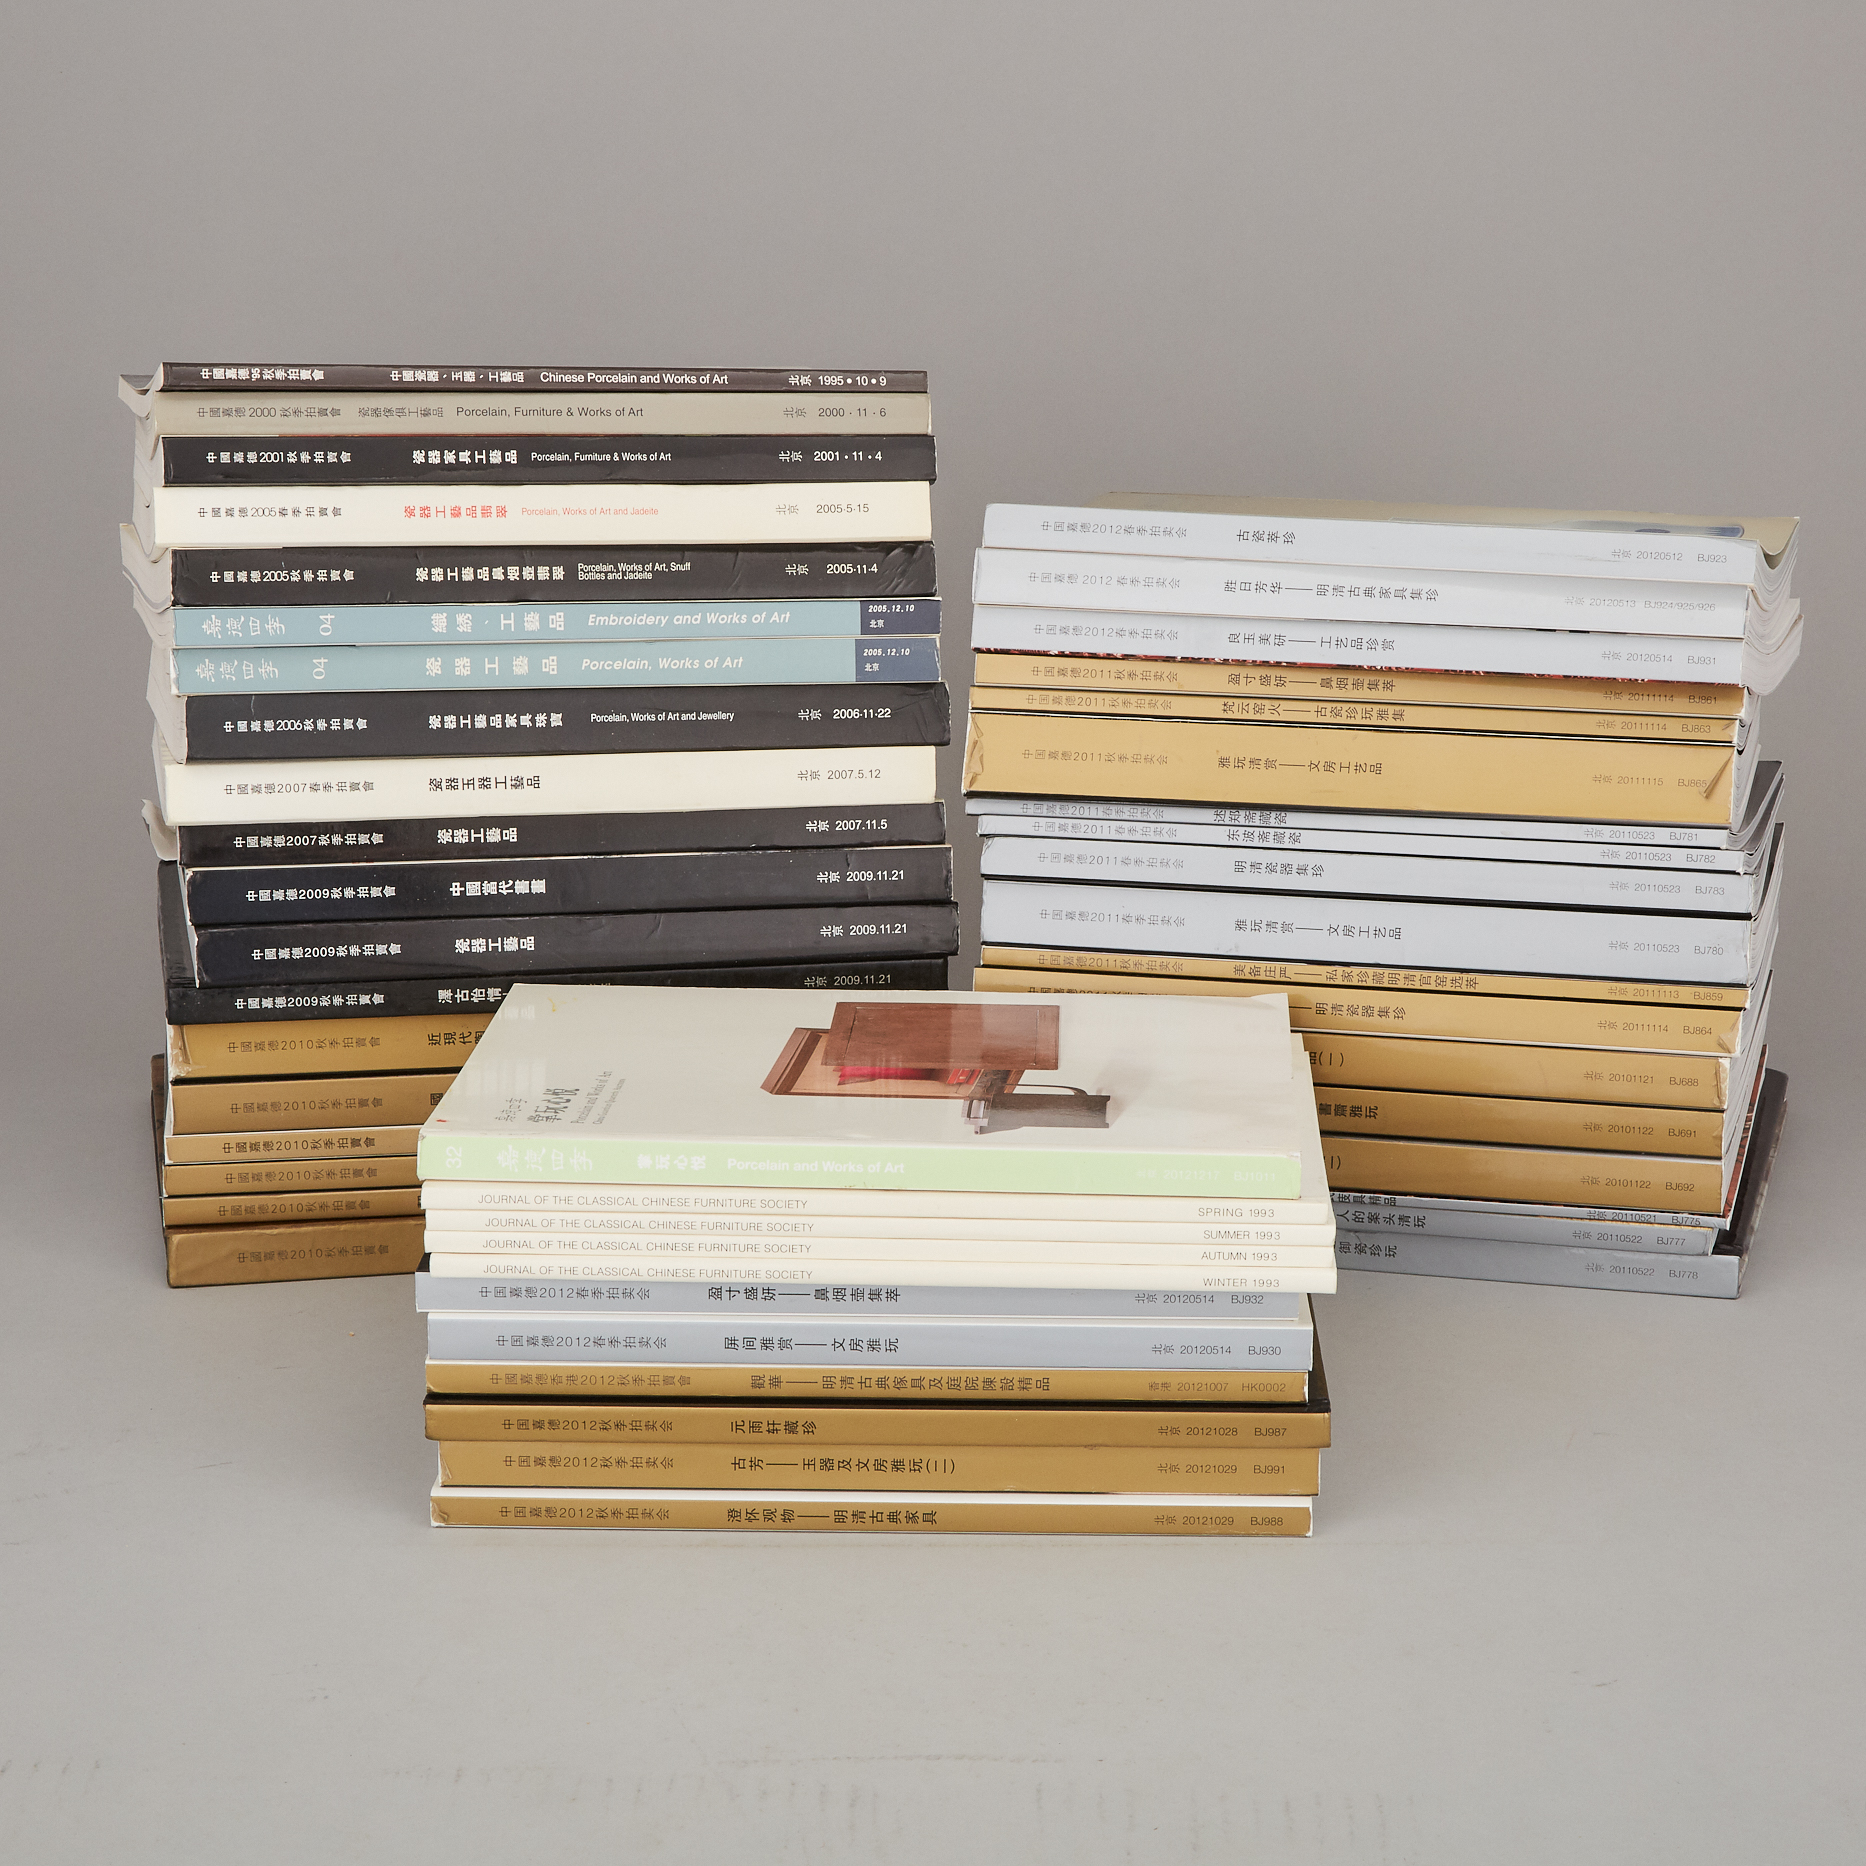 A Group of Forty-Four China Guardian Auction Catalogues, 1995-2012, and a Set of Four Publications of the Journal of Classical Chinese Furniture Society, 1993